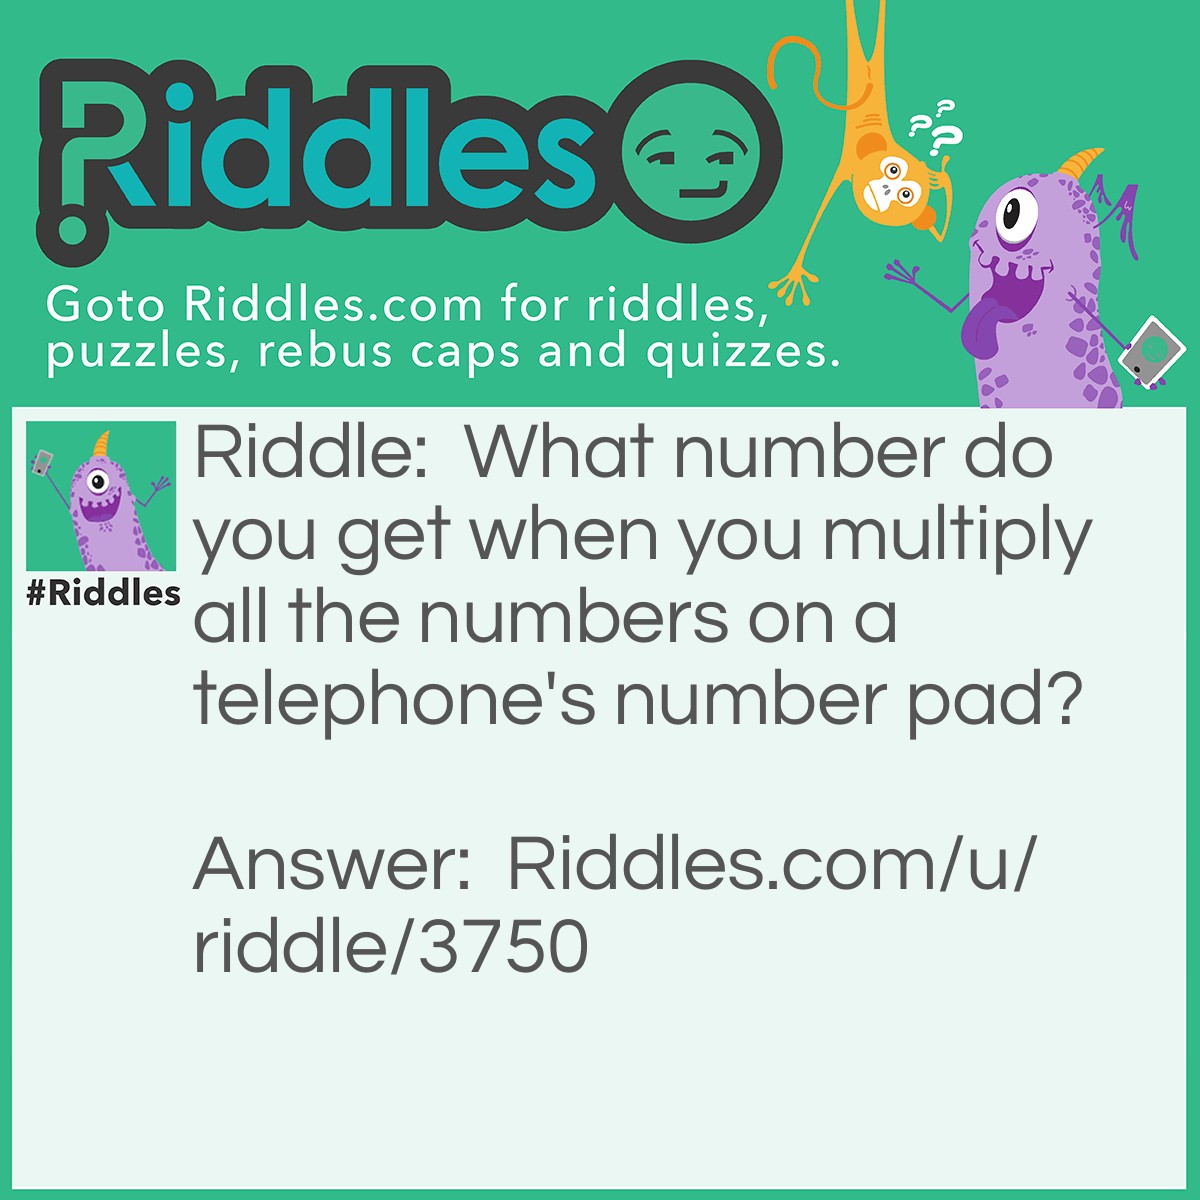 Riddle: What number do you get when you multiply all the numbers on a telephone's number pad? Answer: 0, anything multiplied by 0 will equal zero.